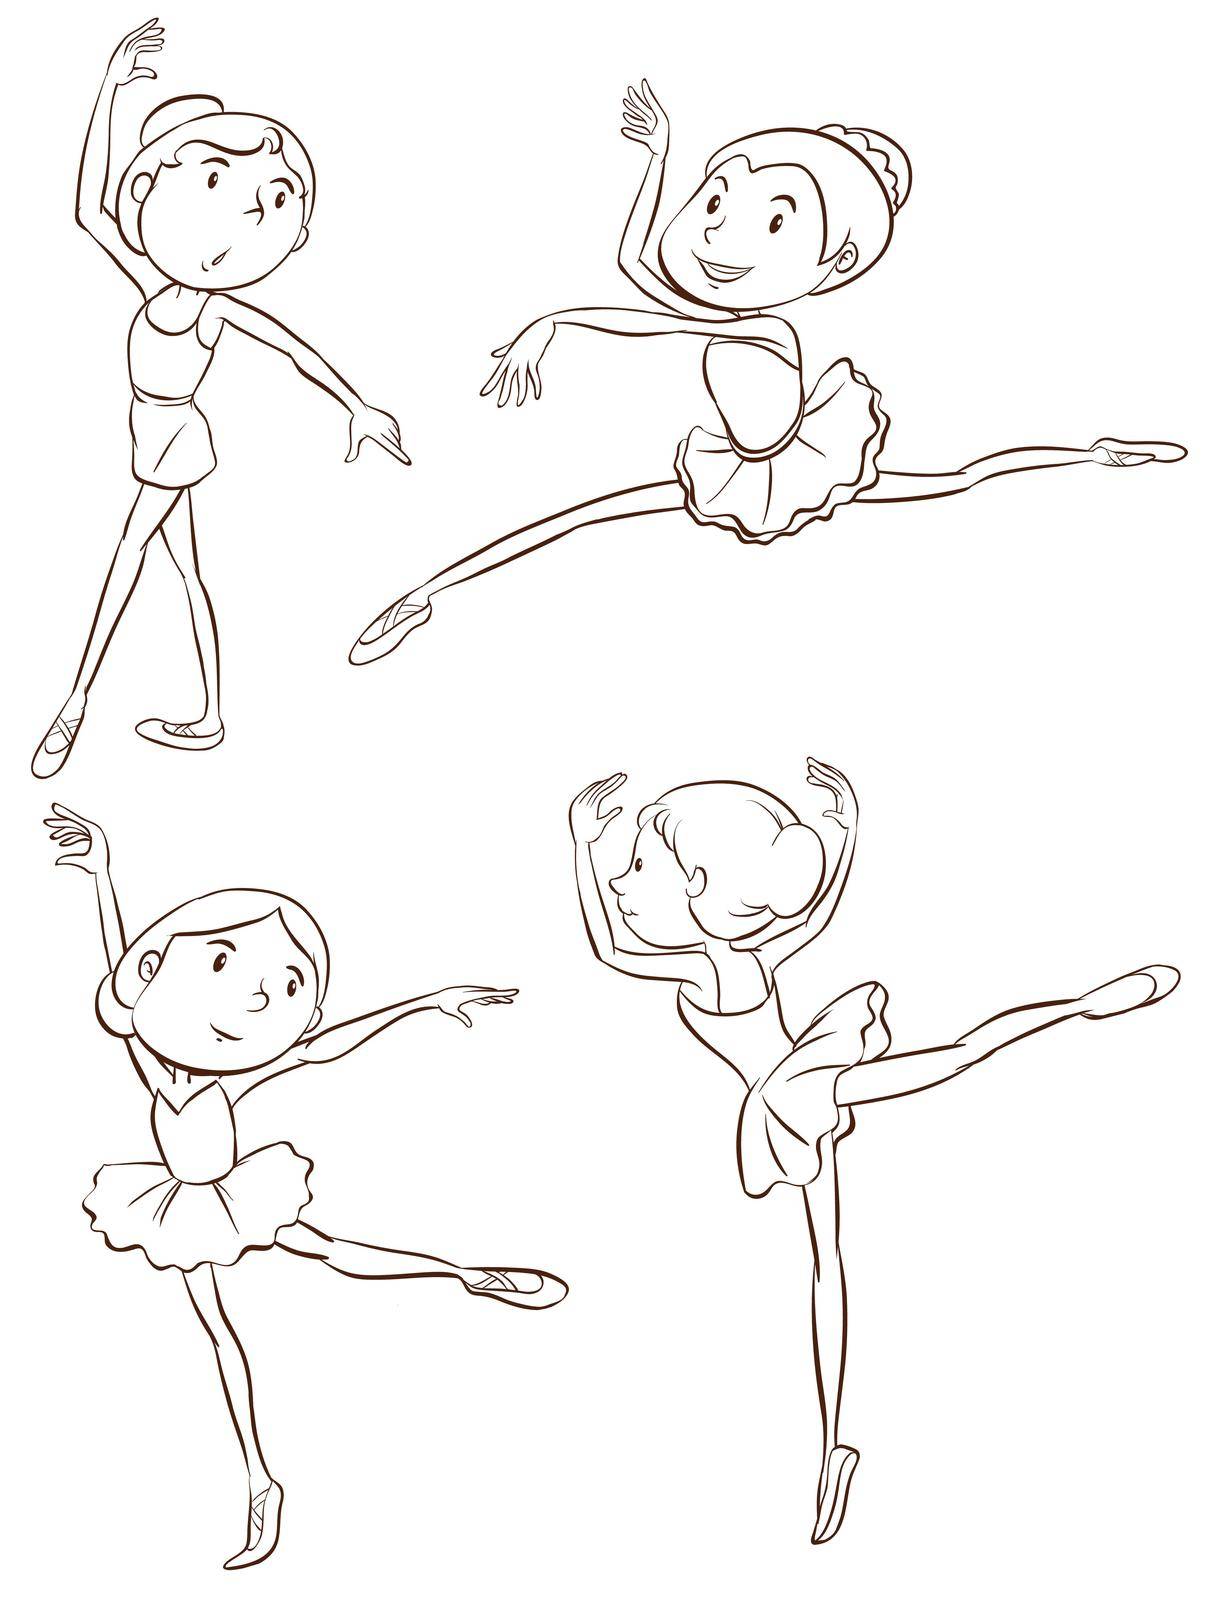 Plain sketches of the ballet dancers by iimages